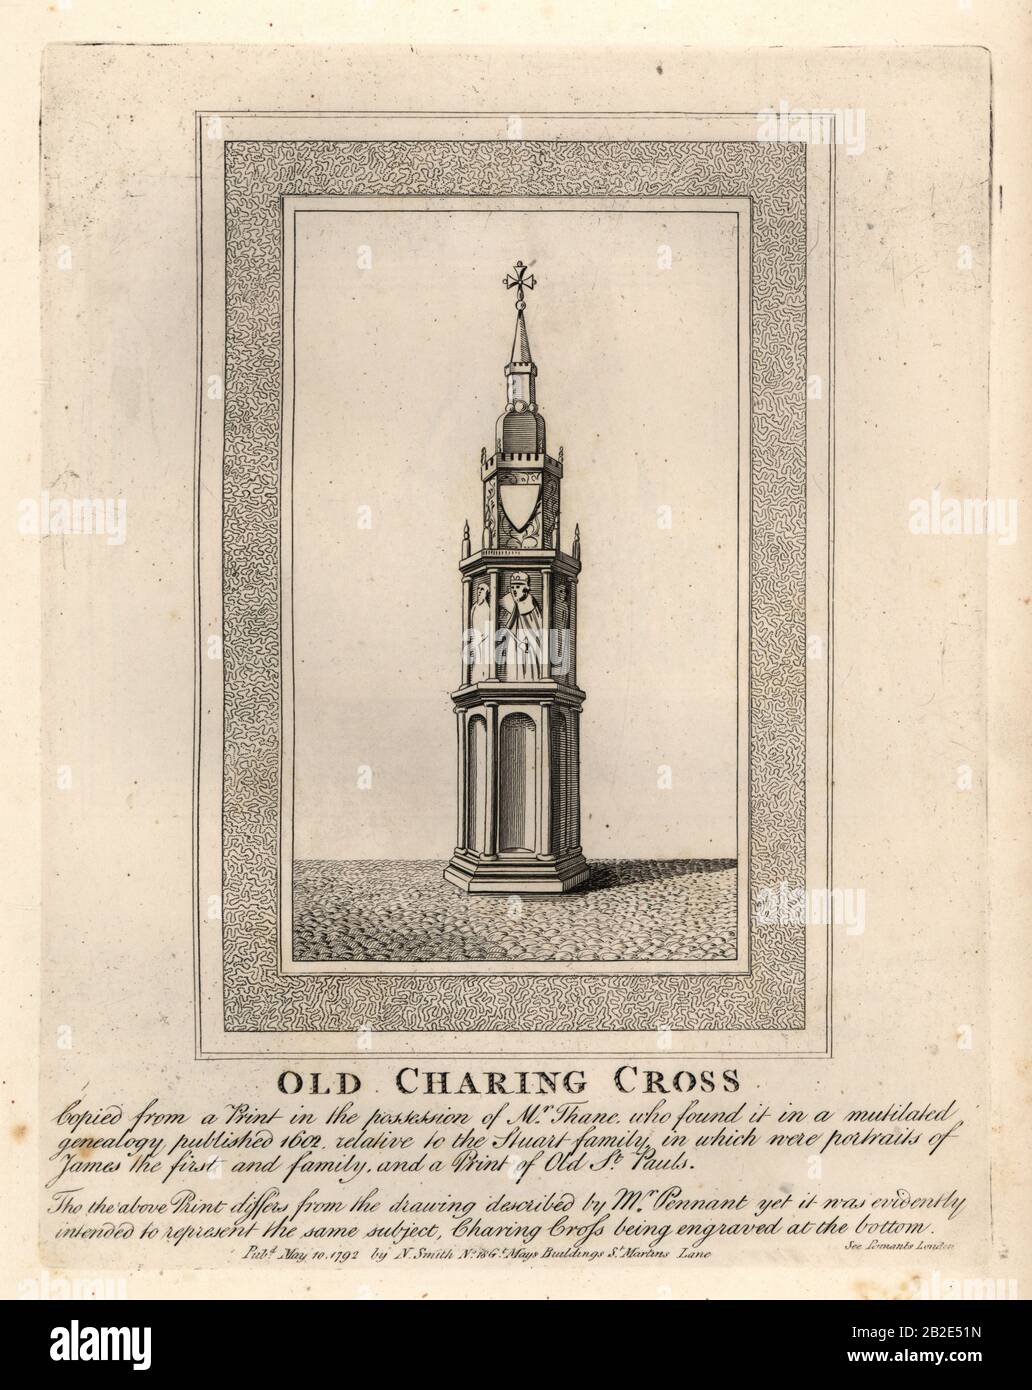 Old Charing Cross, one of 12 medieval Eleanor Crosses, erected in the 1290s until its removal in 1647. Copperplate engraving by John Thomas Smith after original drawings by members of the Society of Antiquaries from his J.T. Smith’s Antiquities of London and its Environs, J. Sewell, R. Folder, J. Simco, London, 1792. Stock Photo